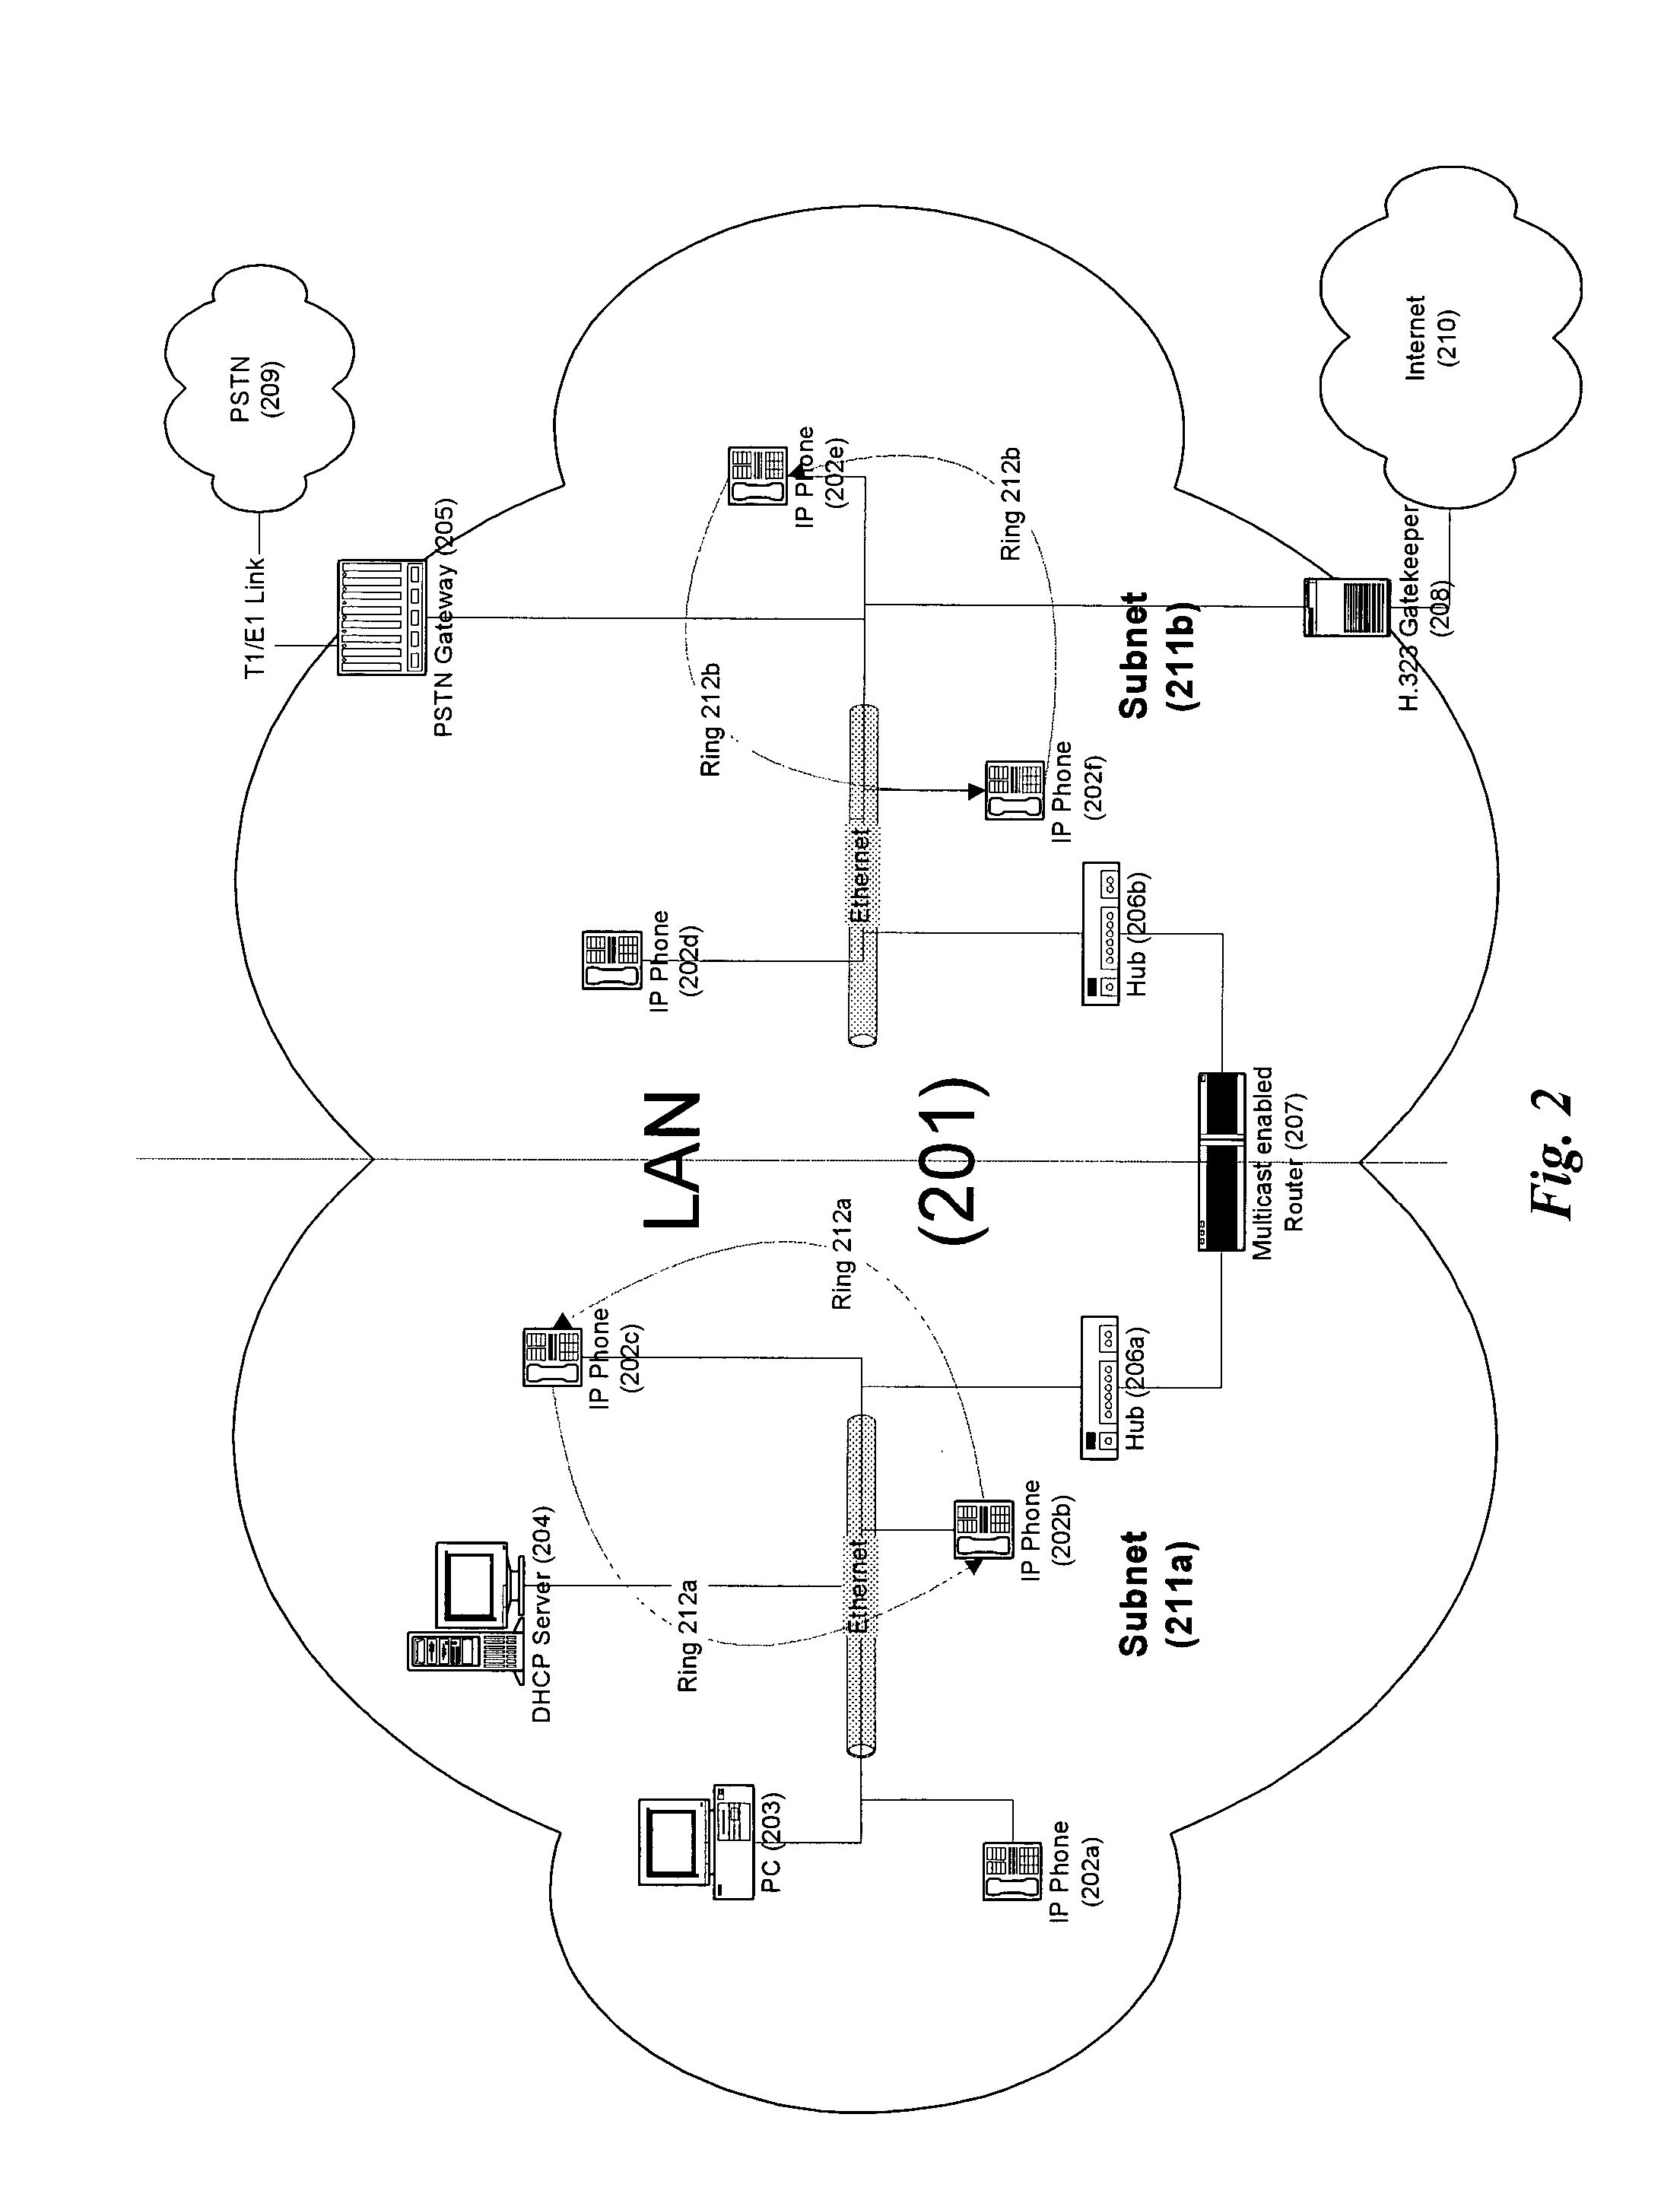 Serverless and switchless internet protocol telephony system and method